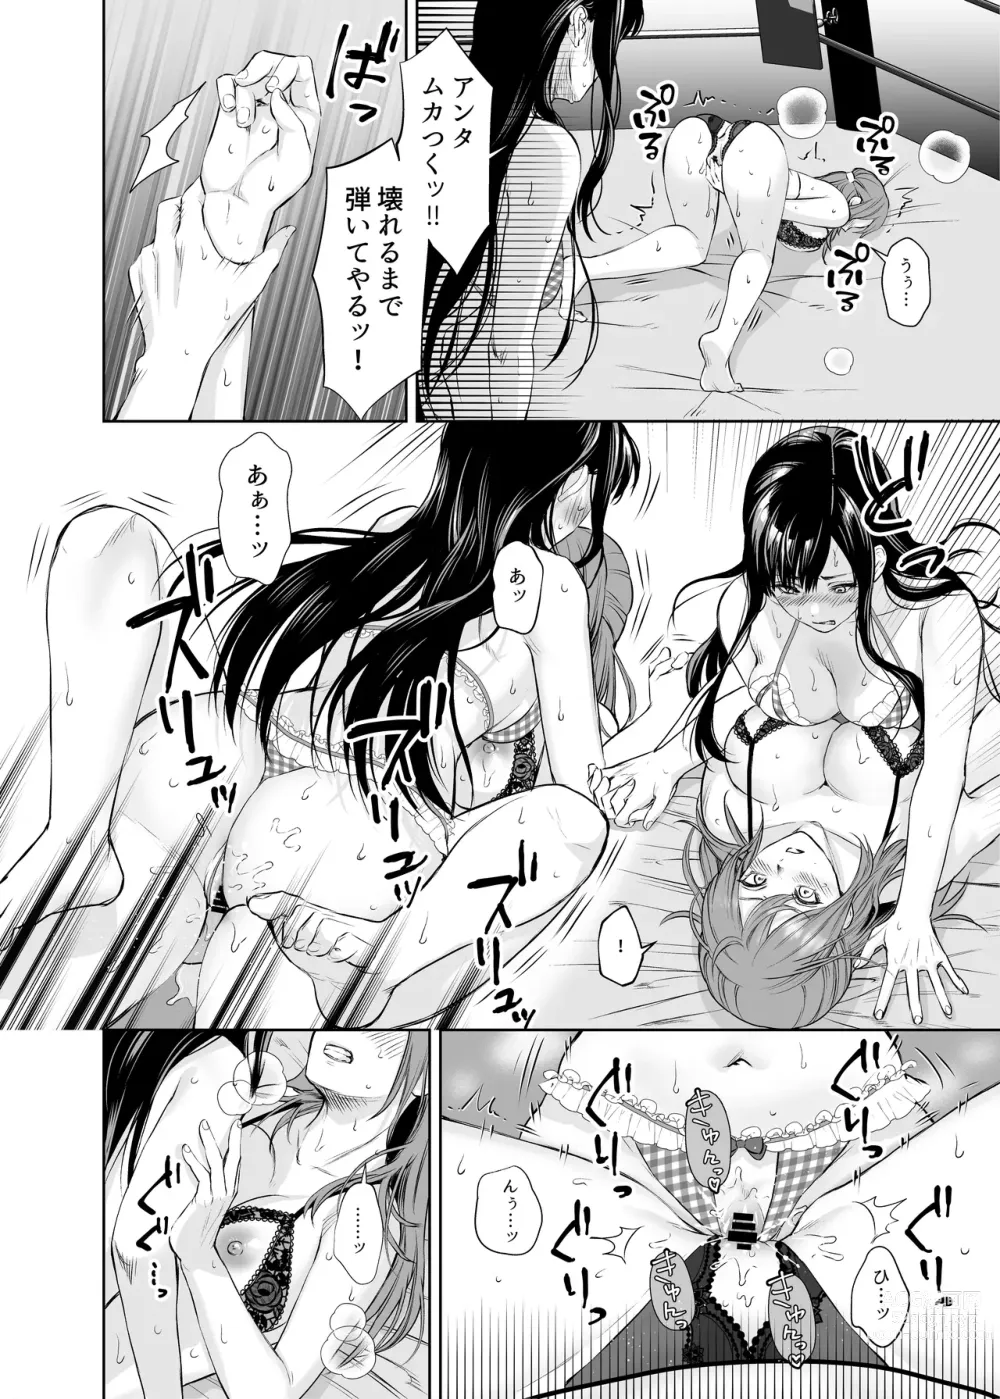 Page 24 of doujinshi LesFes Co Candid Reporting Vol. 004